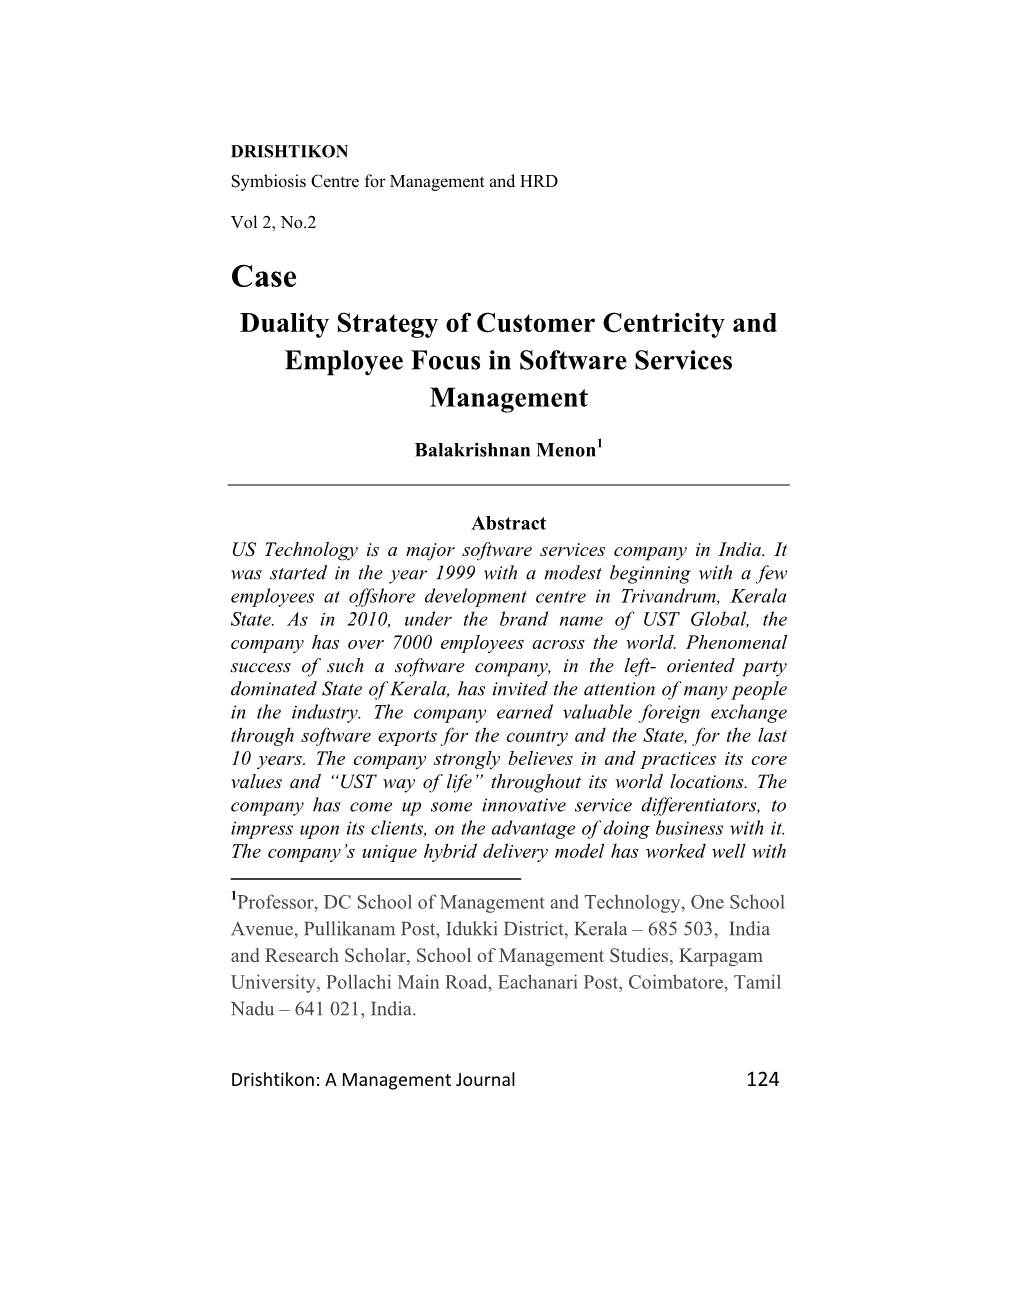 Duality Strategy of Customer Centricity and Employee Focus in Software Services Management